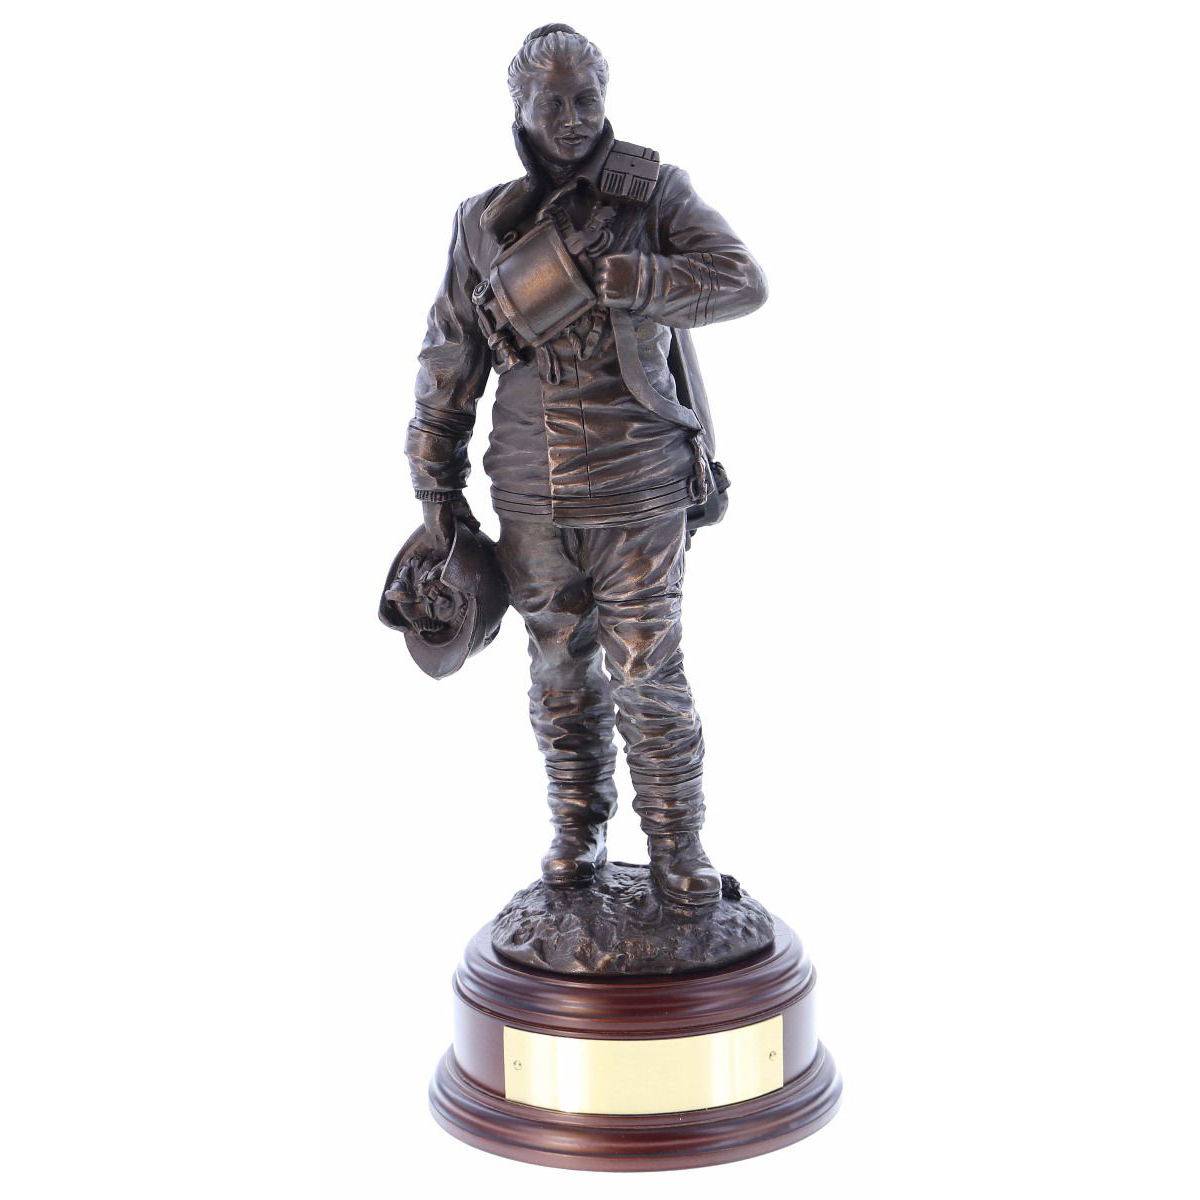 Firefighter Statues for Sale